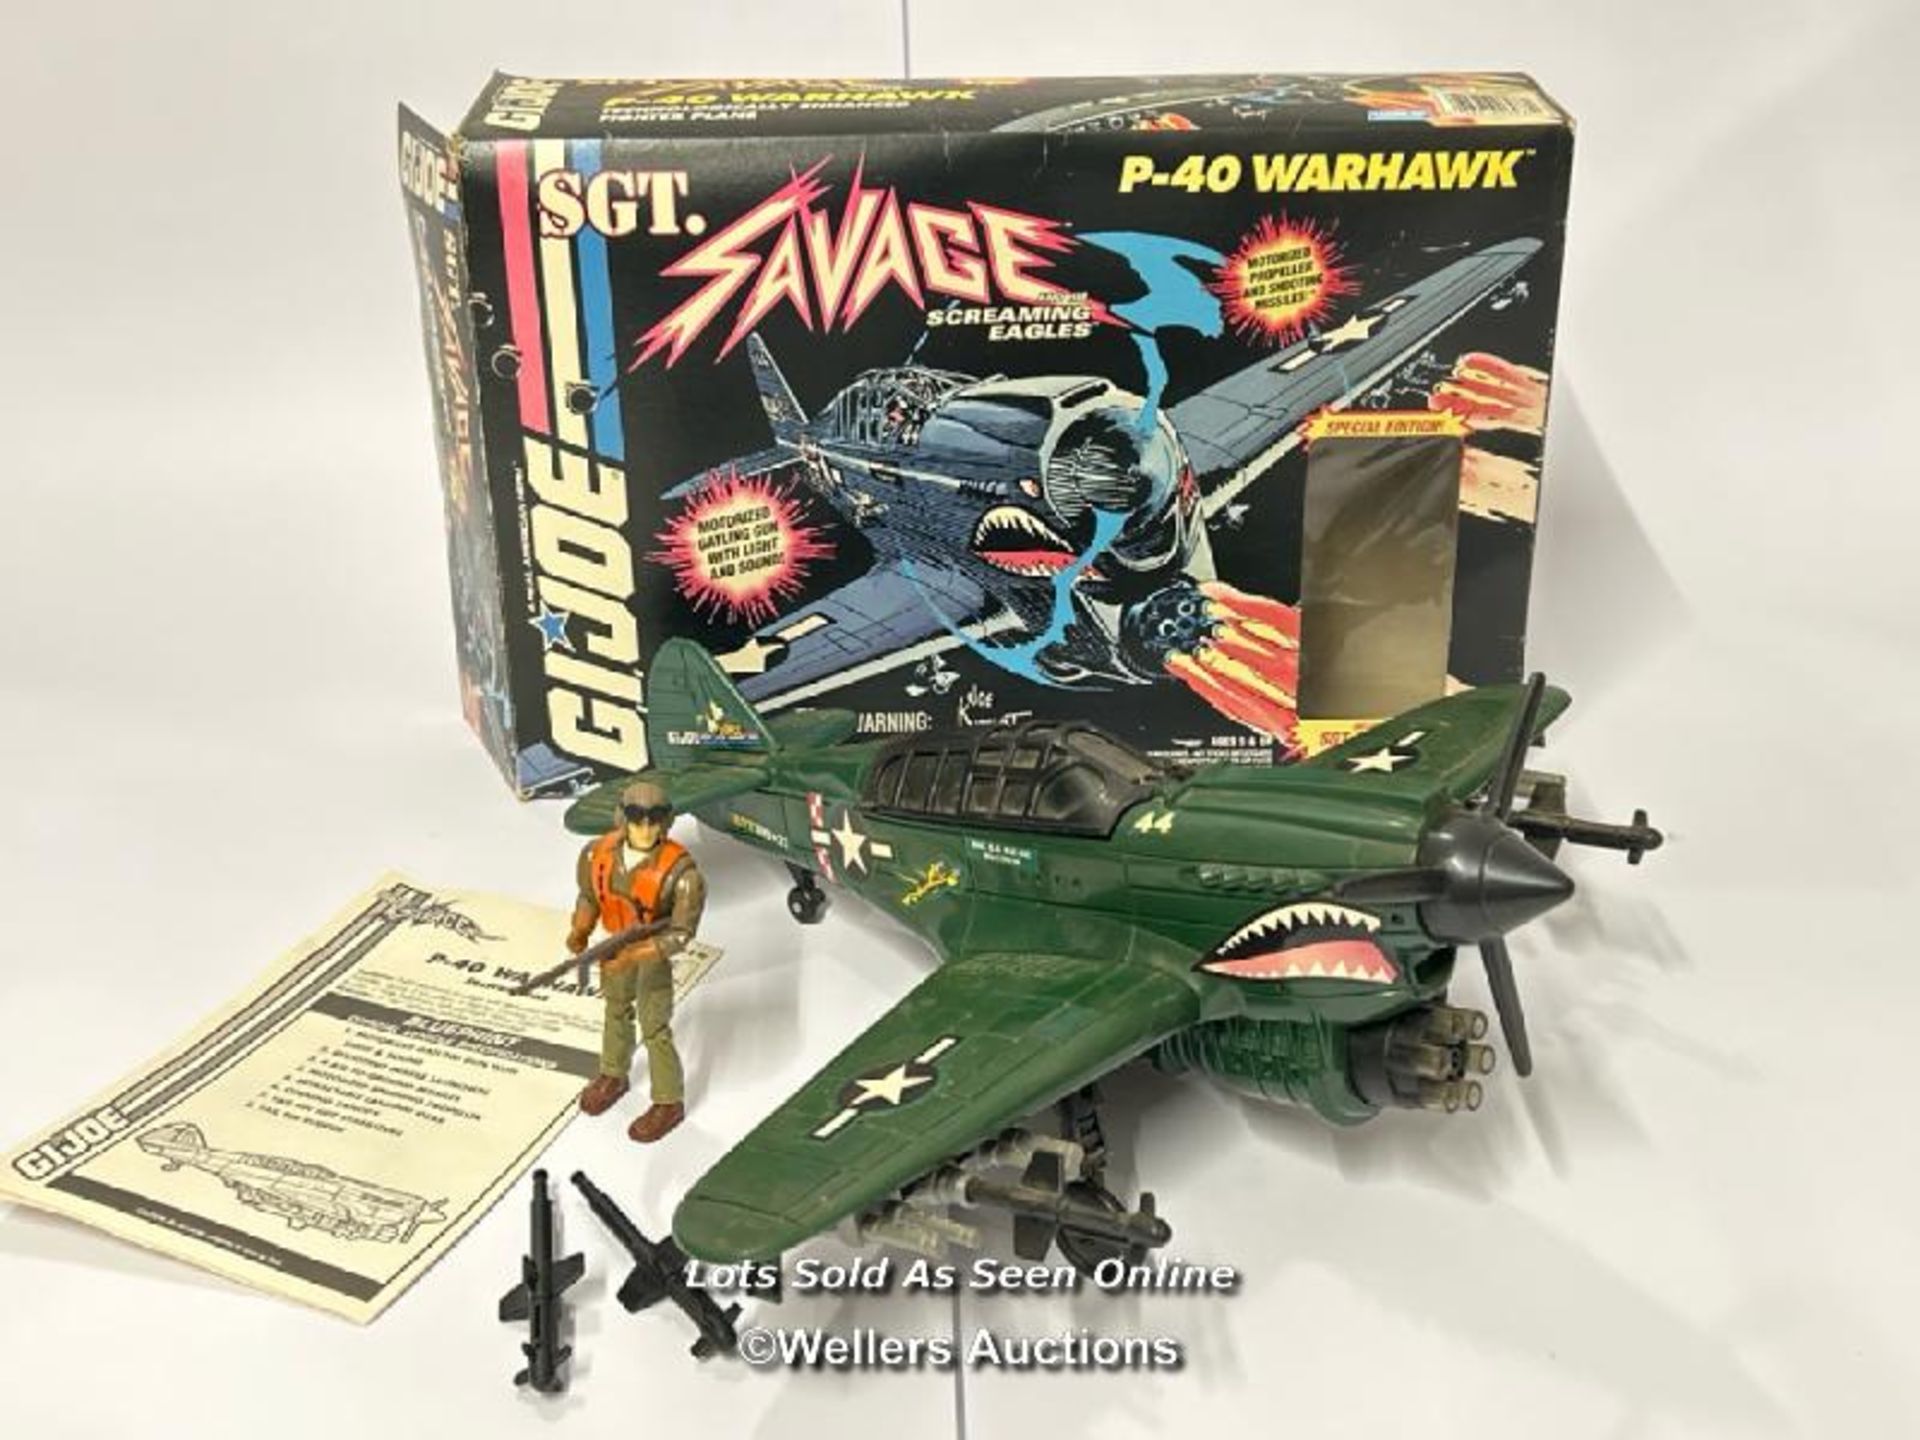 Hasbro GI Joe boxed P-40 Warhawk plane with St. Savage action figure, in fair condition with working